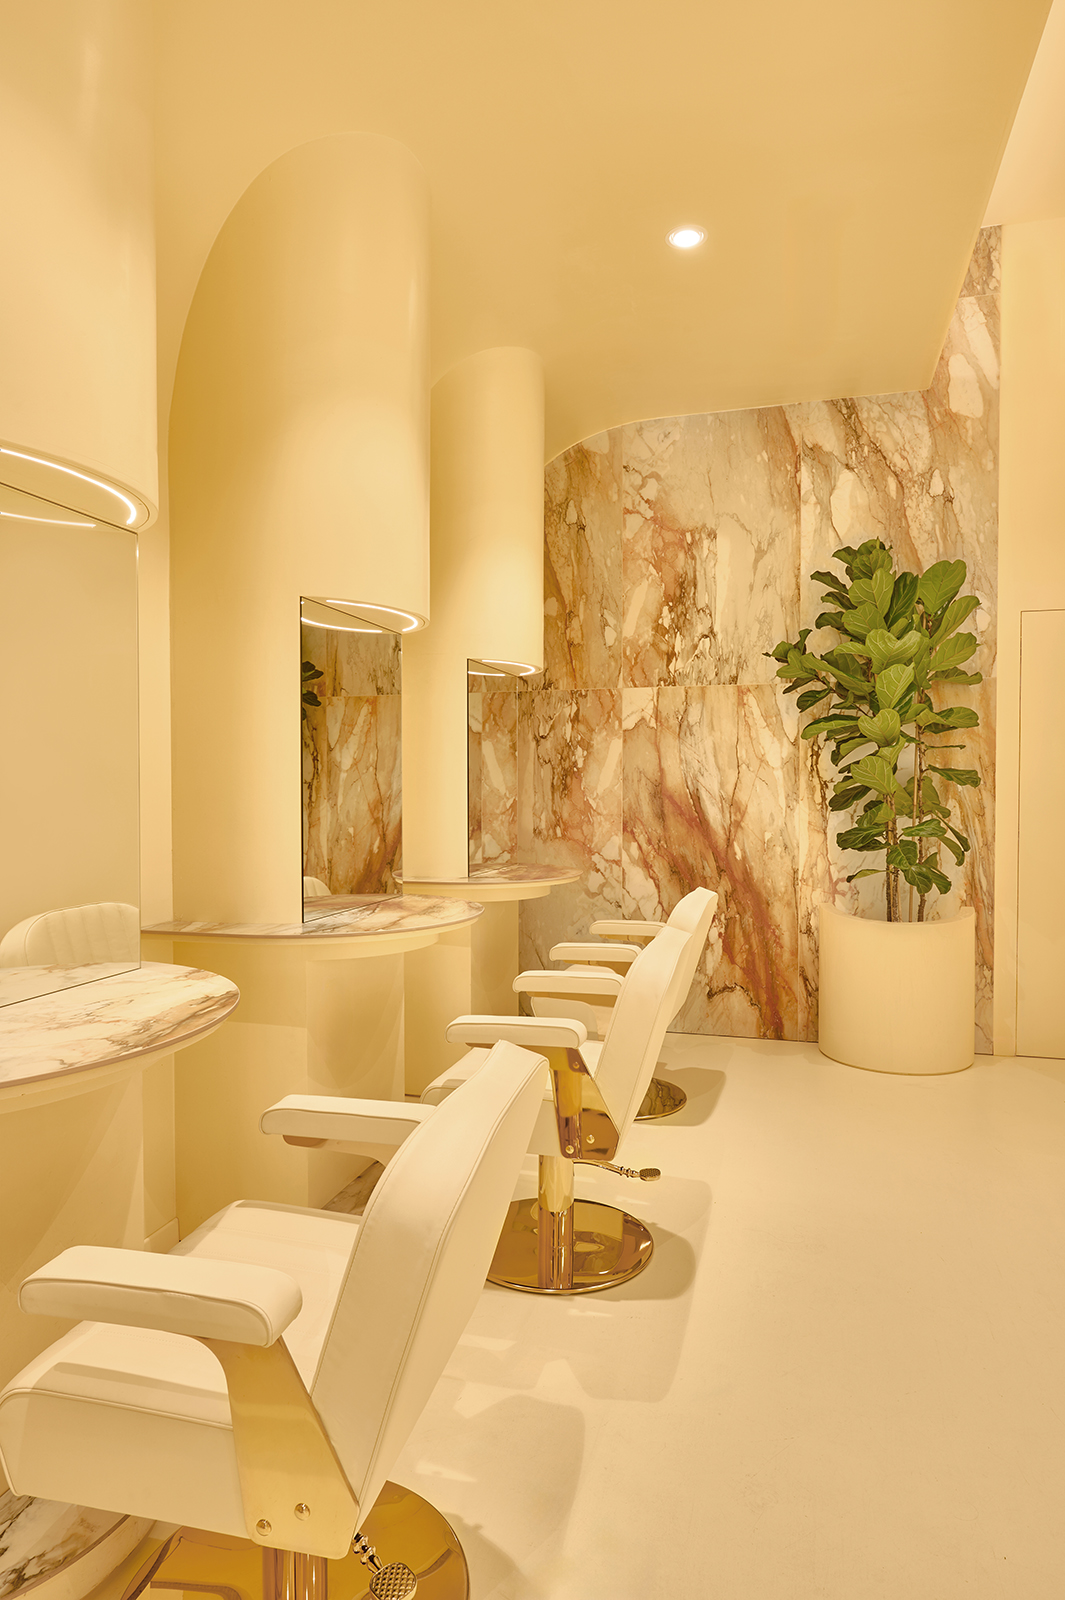 Chairs in Milan beauty salon We Are Emma designed by Masquespacio in Effect Magazine